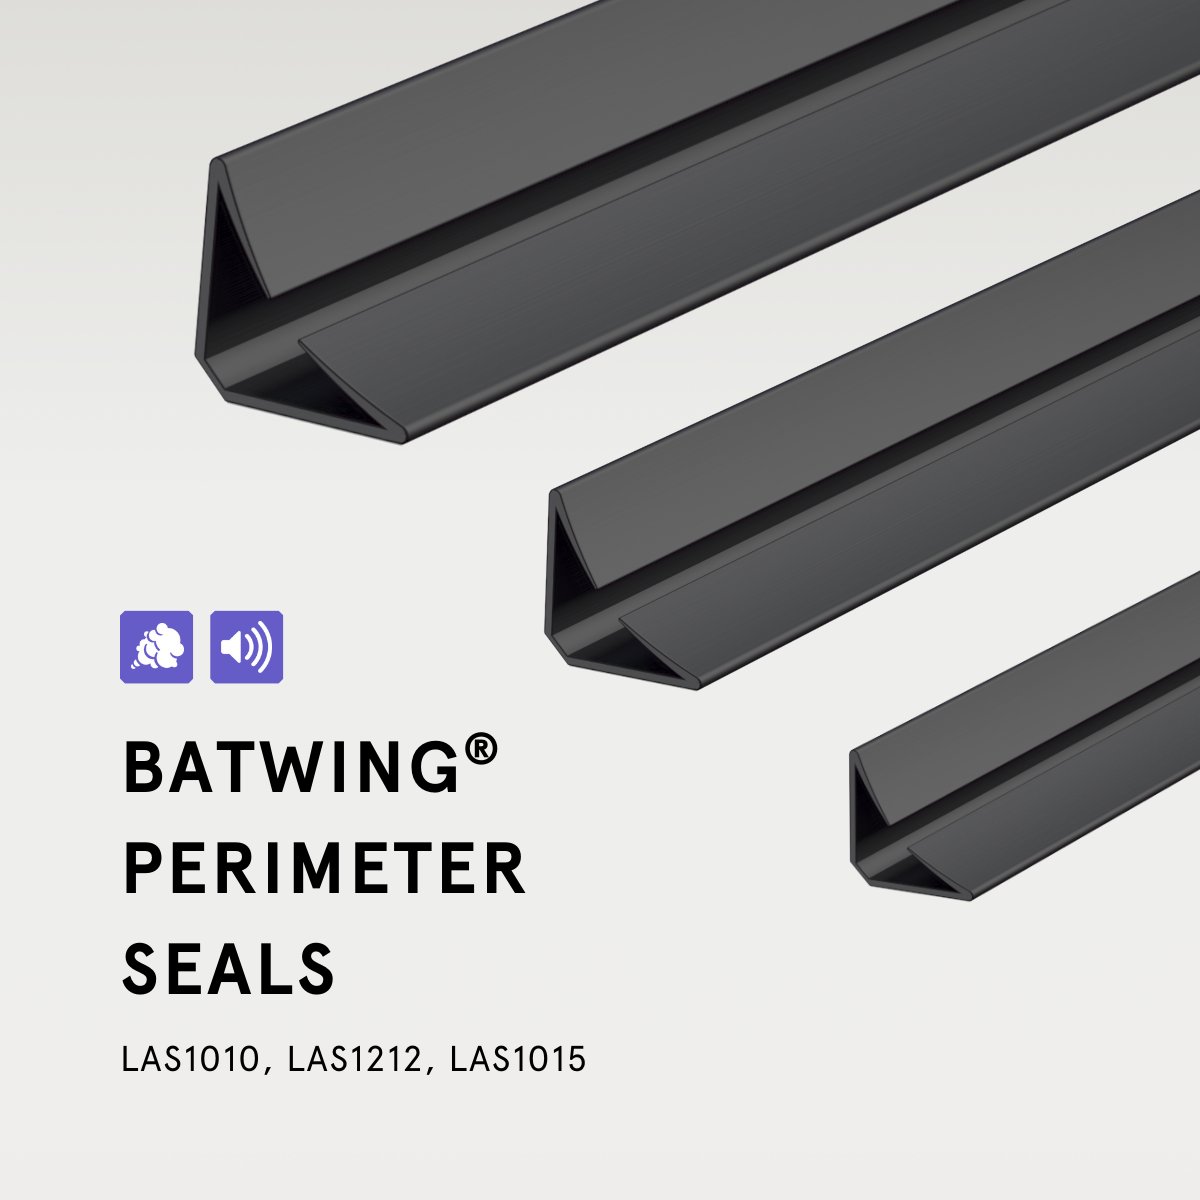 🔊💨 Lorient’s Batwing® seals are typically used in commercial, industrial & residential settings, where sound & smoke containment is paramount. 

They are ideal for retrofitting or upgrading doors with an easy peel-and-stick application.  

See more: lnkd.in/dFq7hCYe